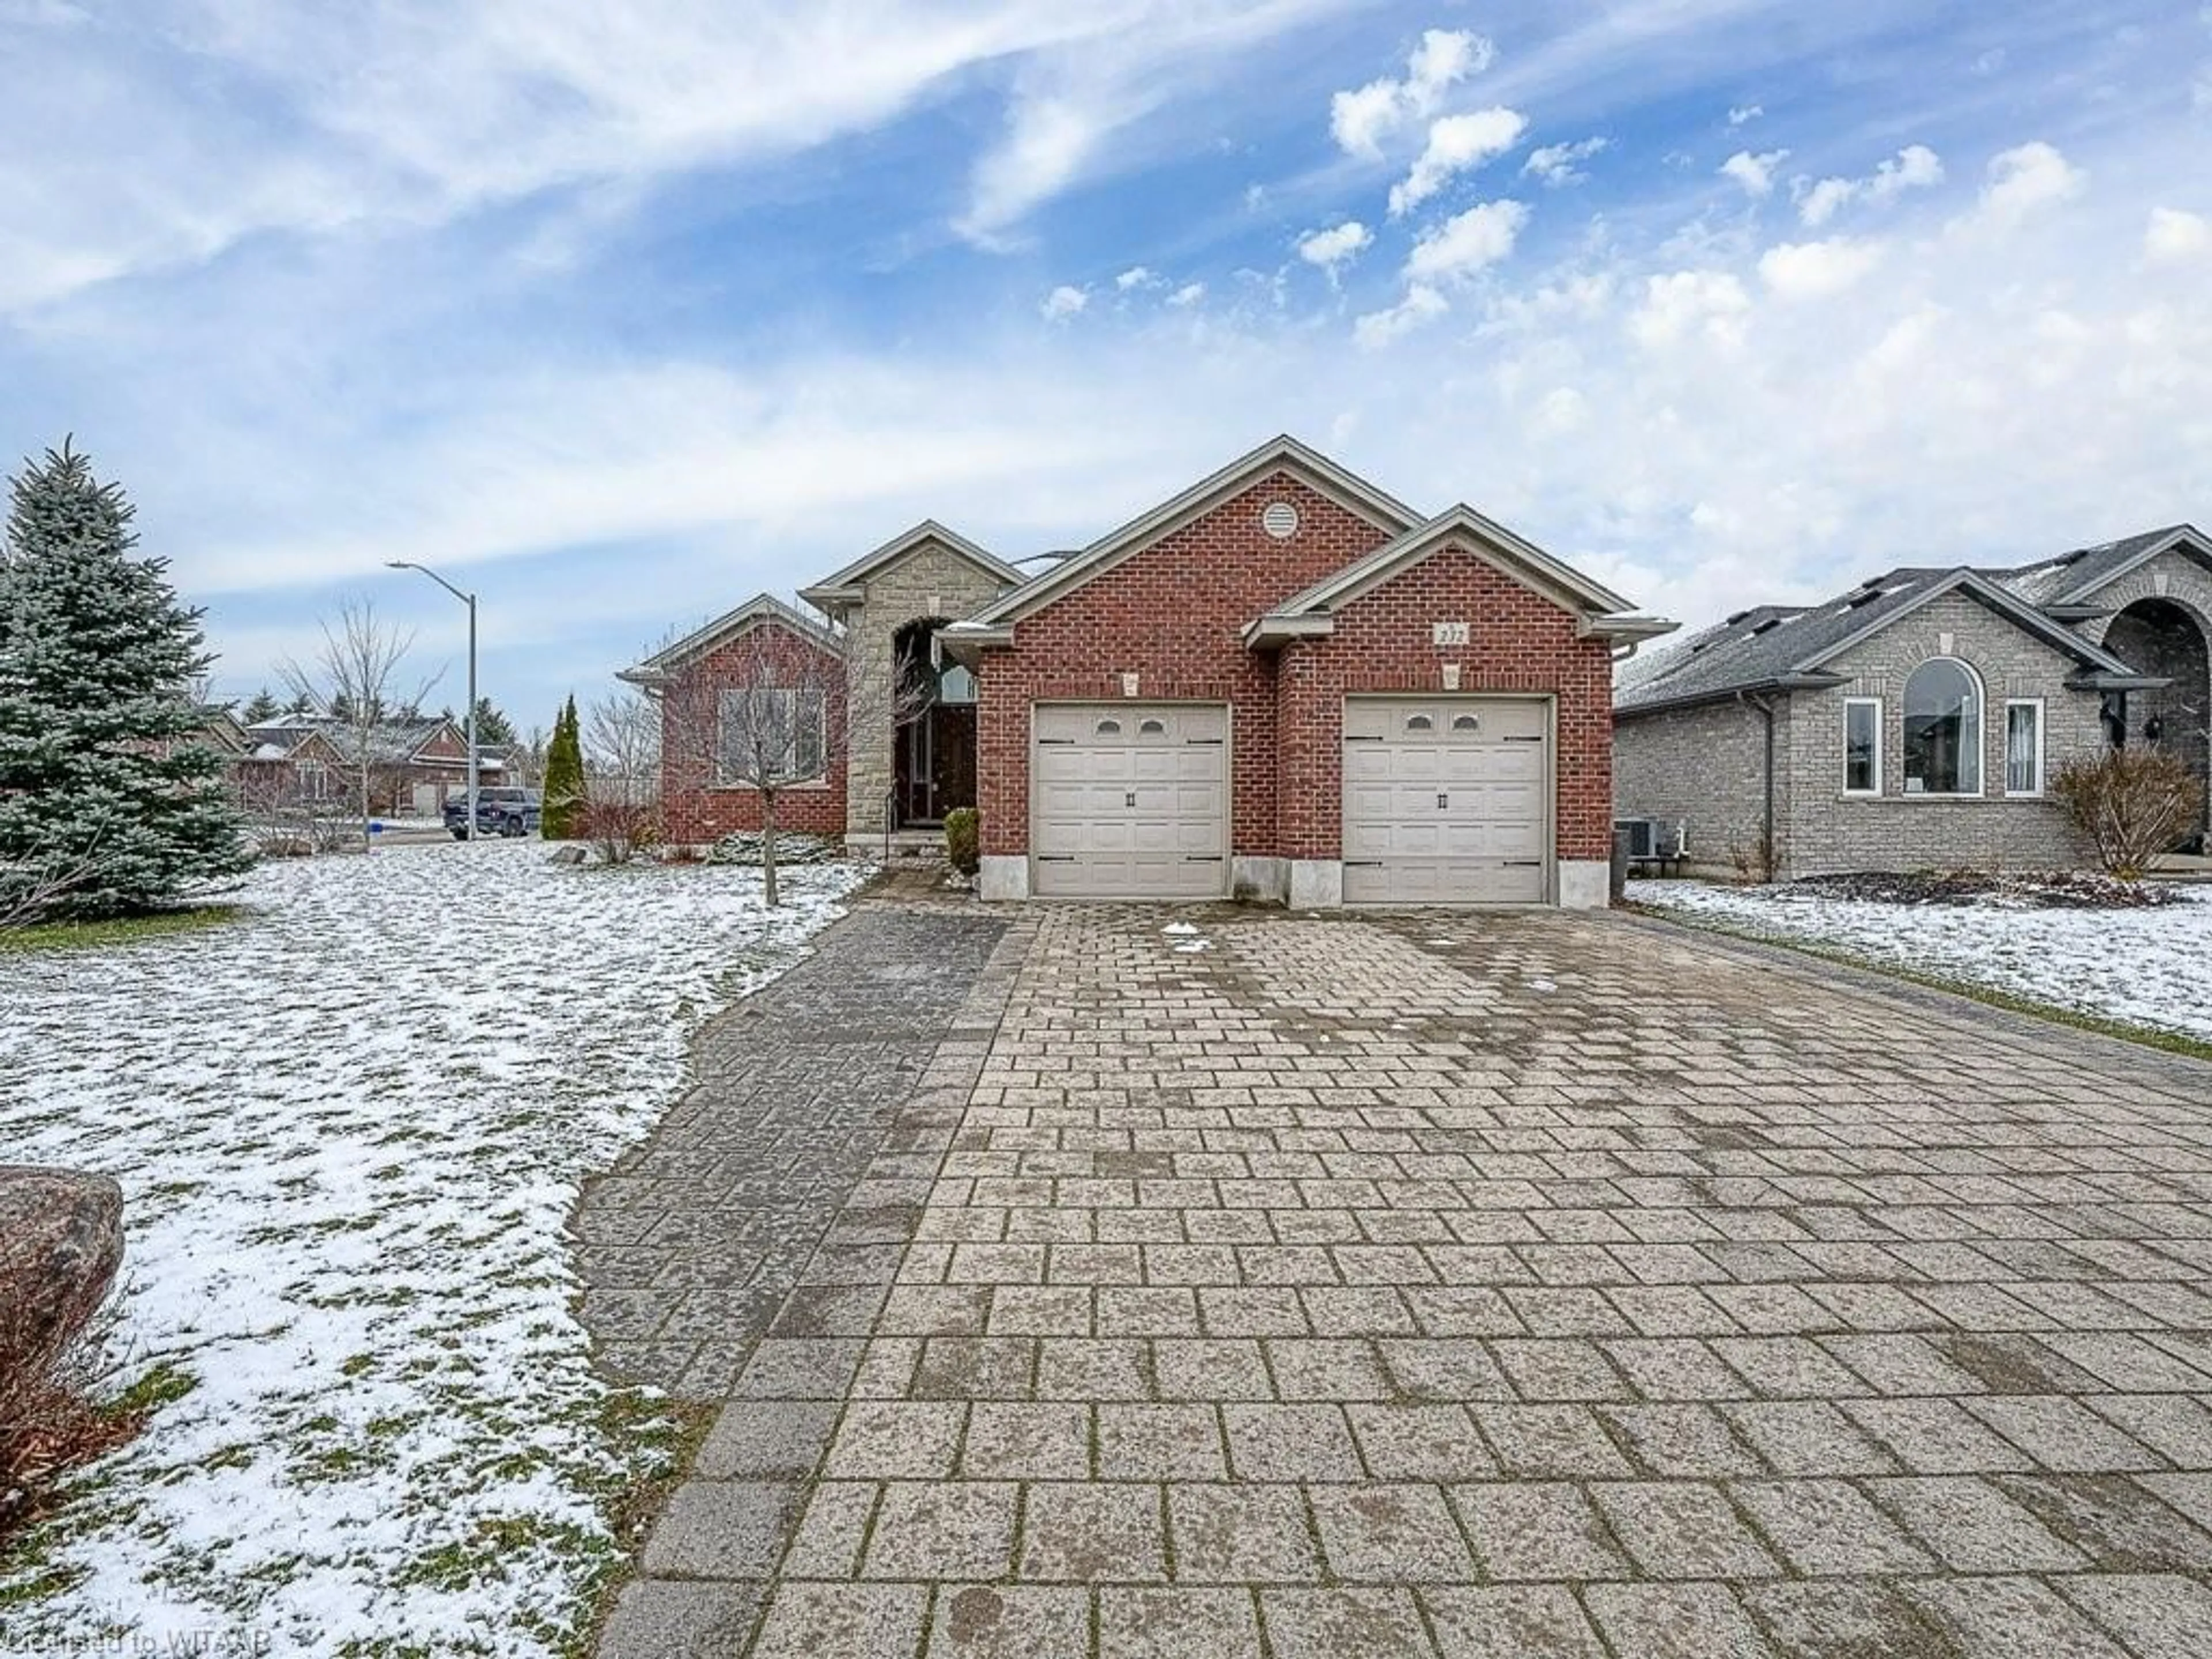 Home with brick exterior material for 232 Boyd Boulevard, Thamesford Ontario N0M 2M0